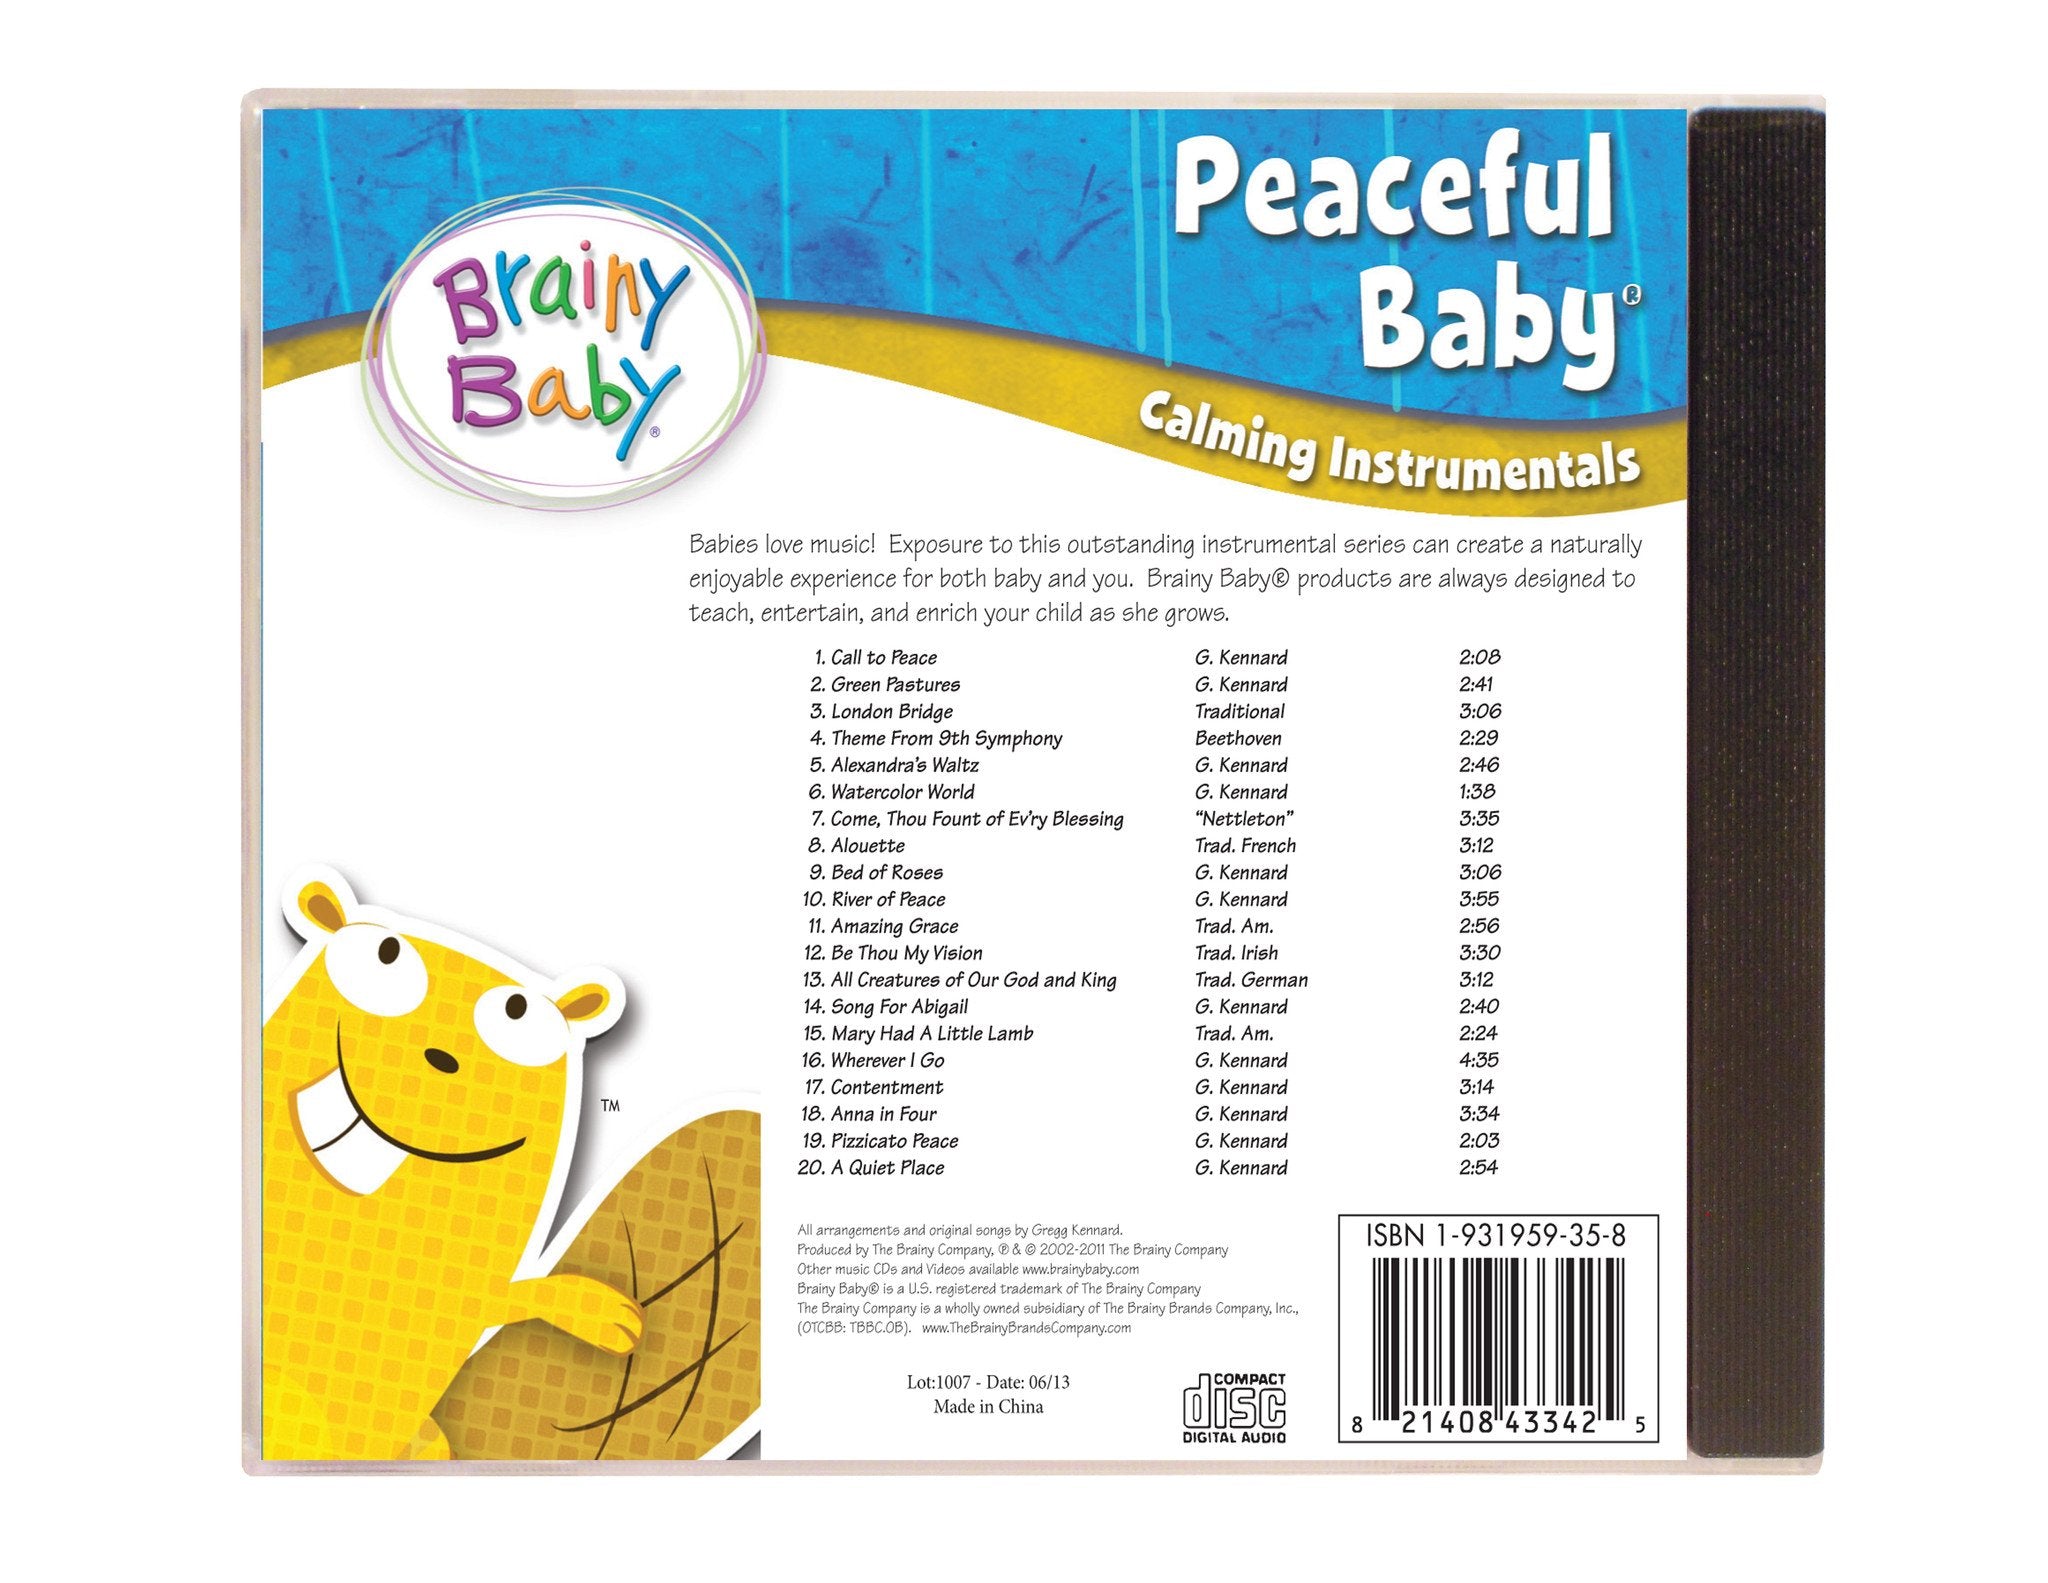 Brainy Baby Peaceful Baby Music CD Back Cover Song List